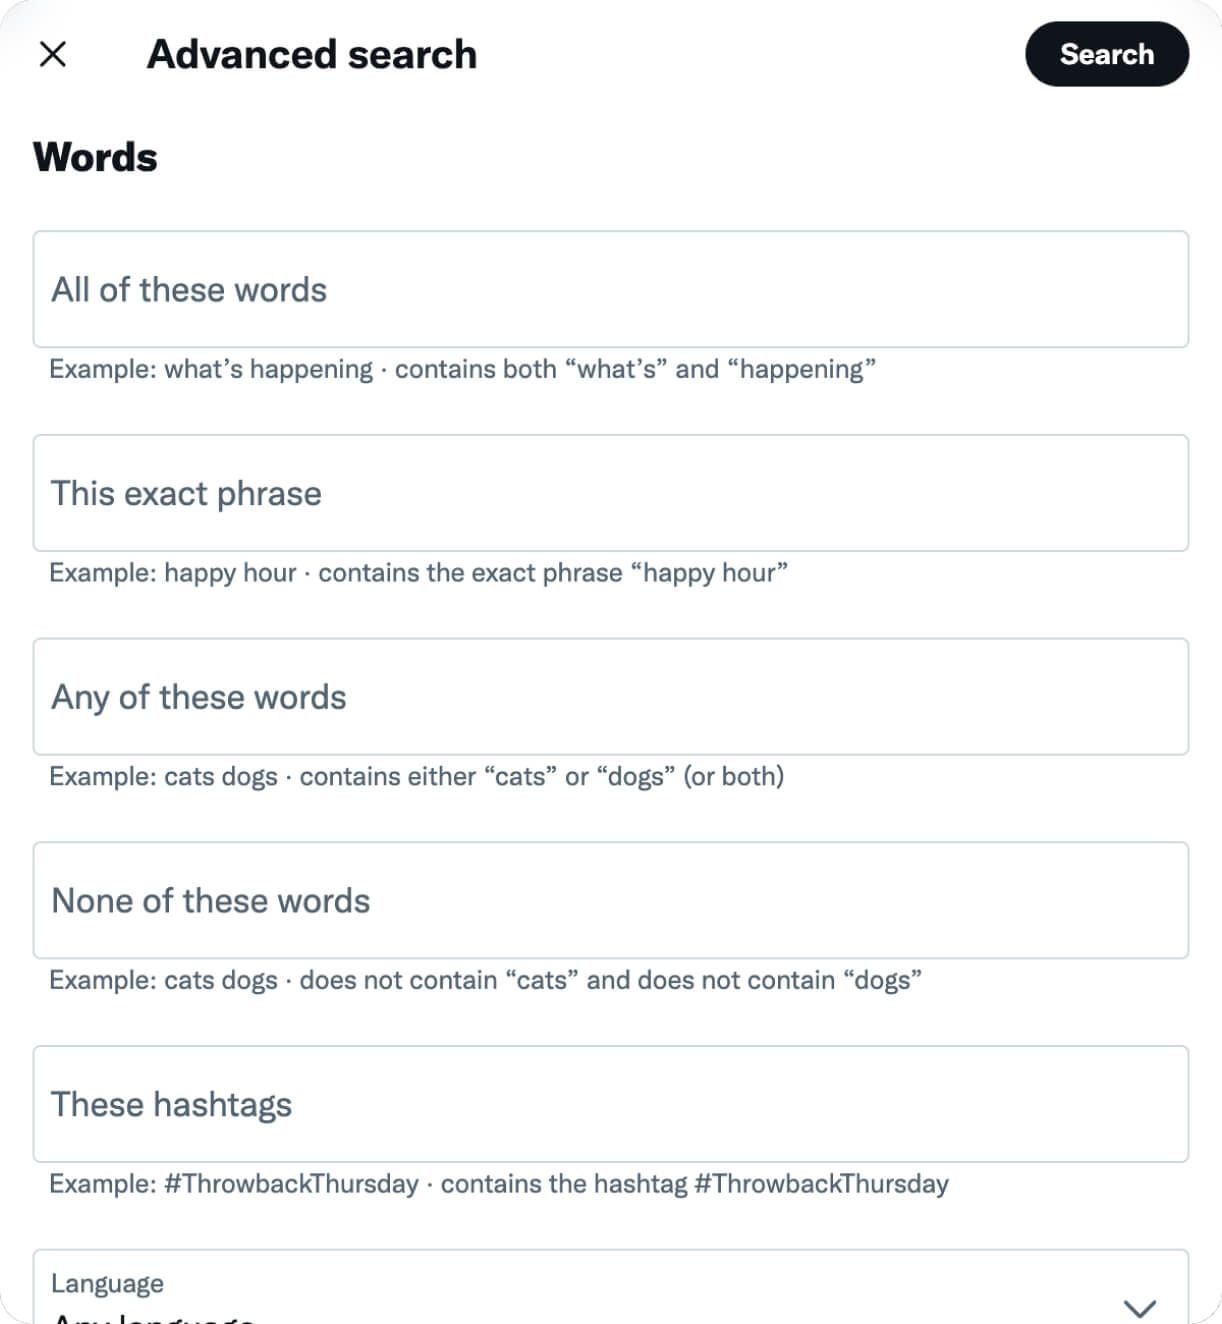 Master Twitter’s Advance Search to understand what to post next